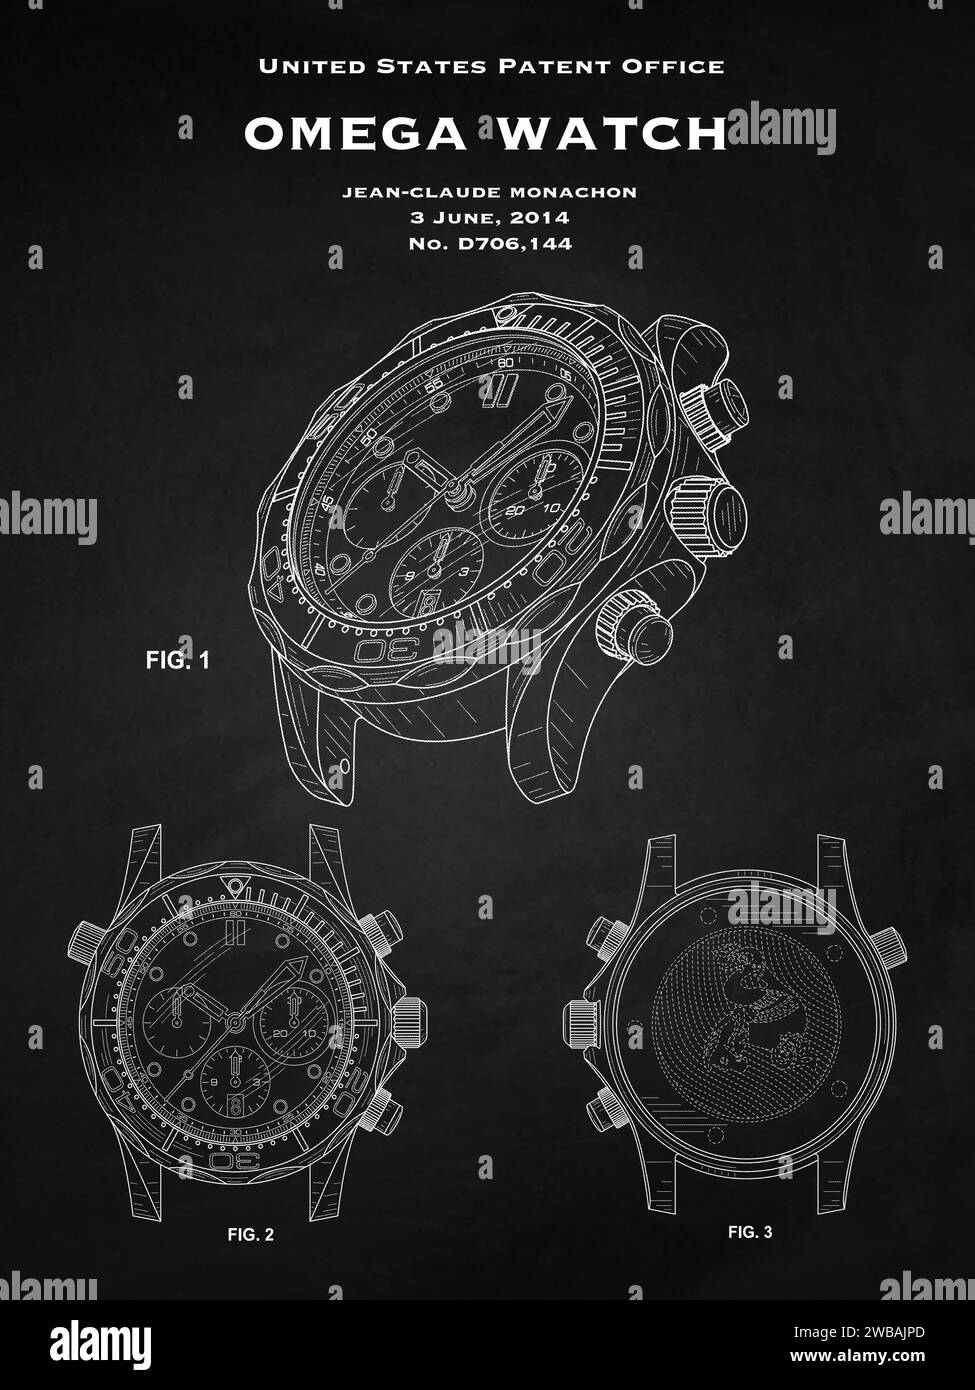 US patent design from 2014 for an Omega dive watch design on a black background Stock Photo